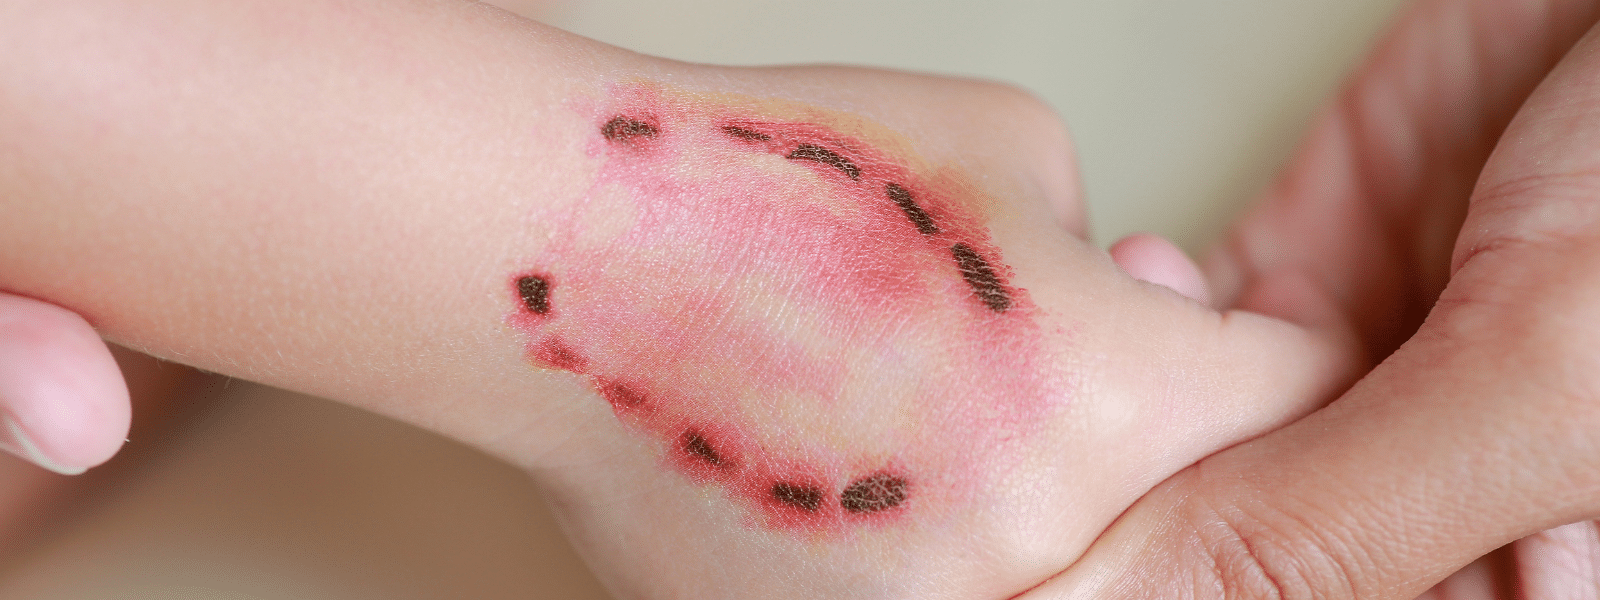 dog bite wounds